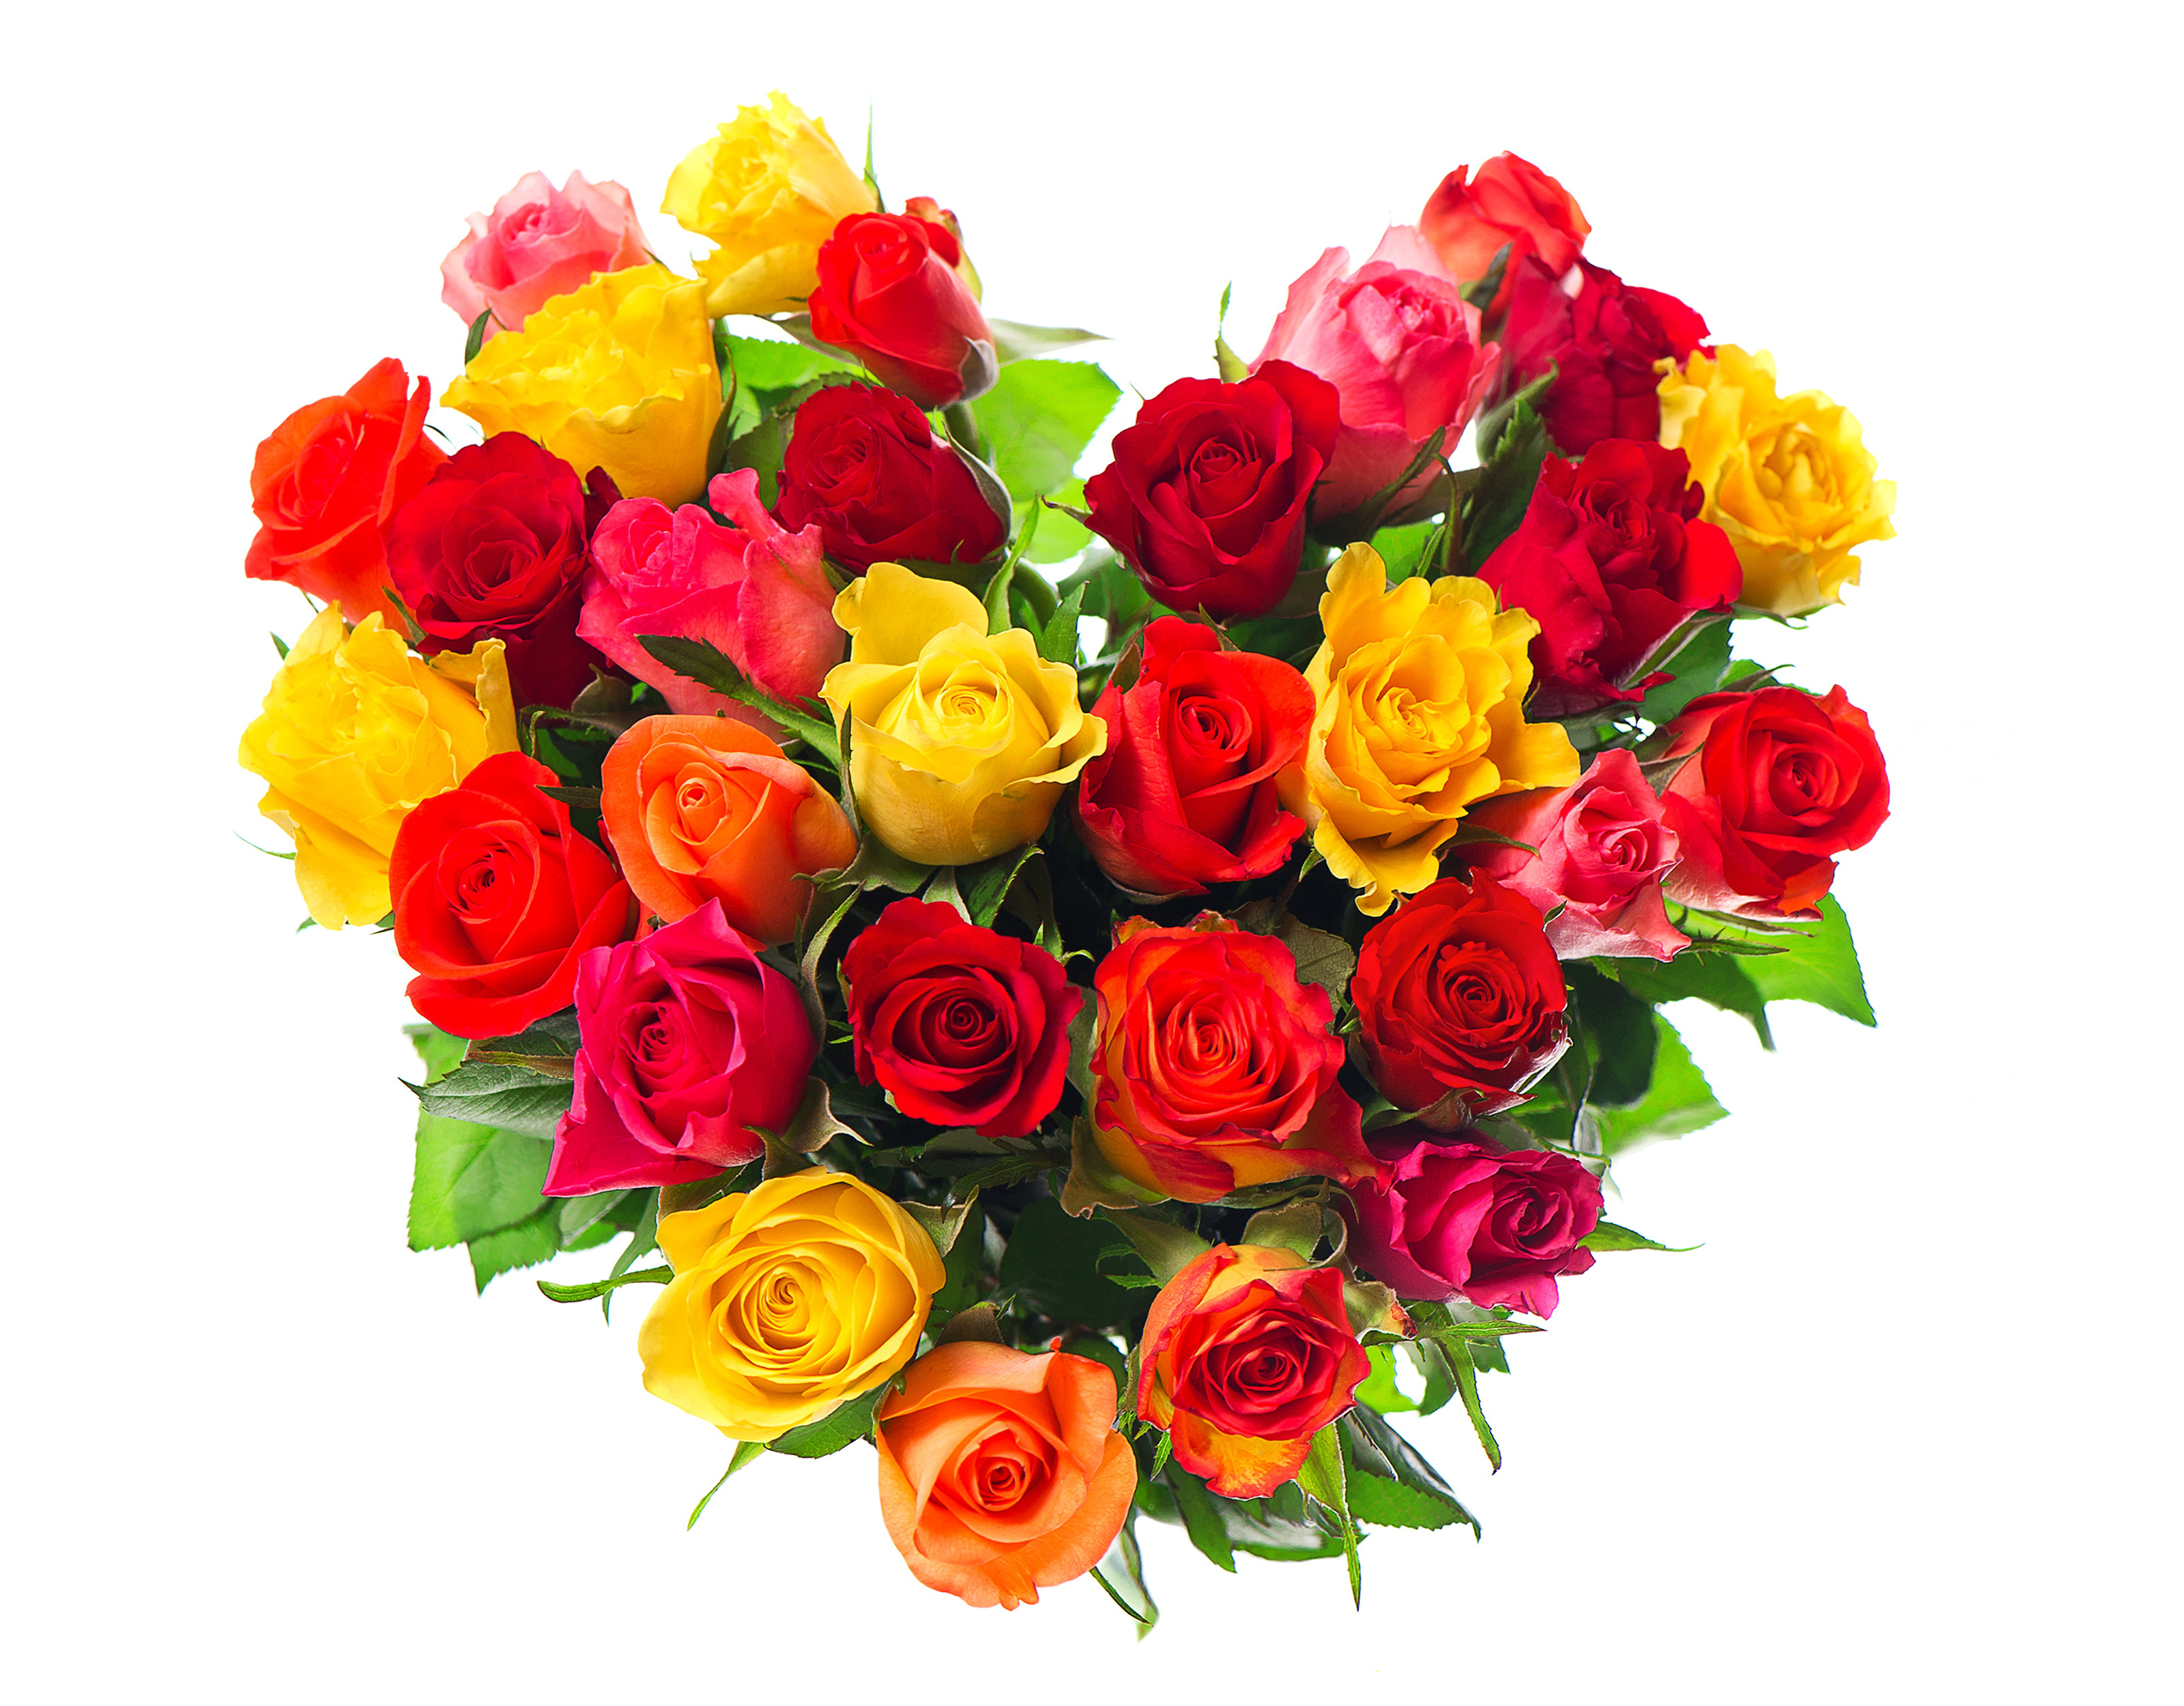 red rose, yellow rose, rose, heart, pink rose, holiday, valentine's day, colorful Full HD